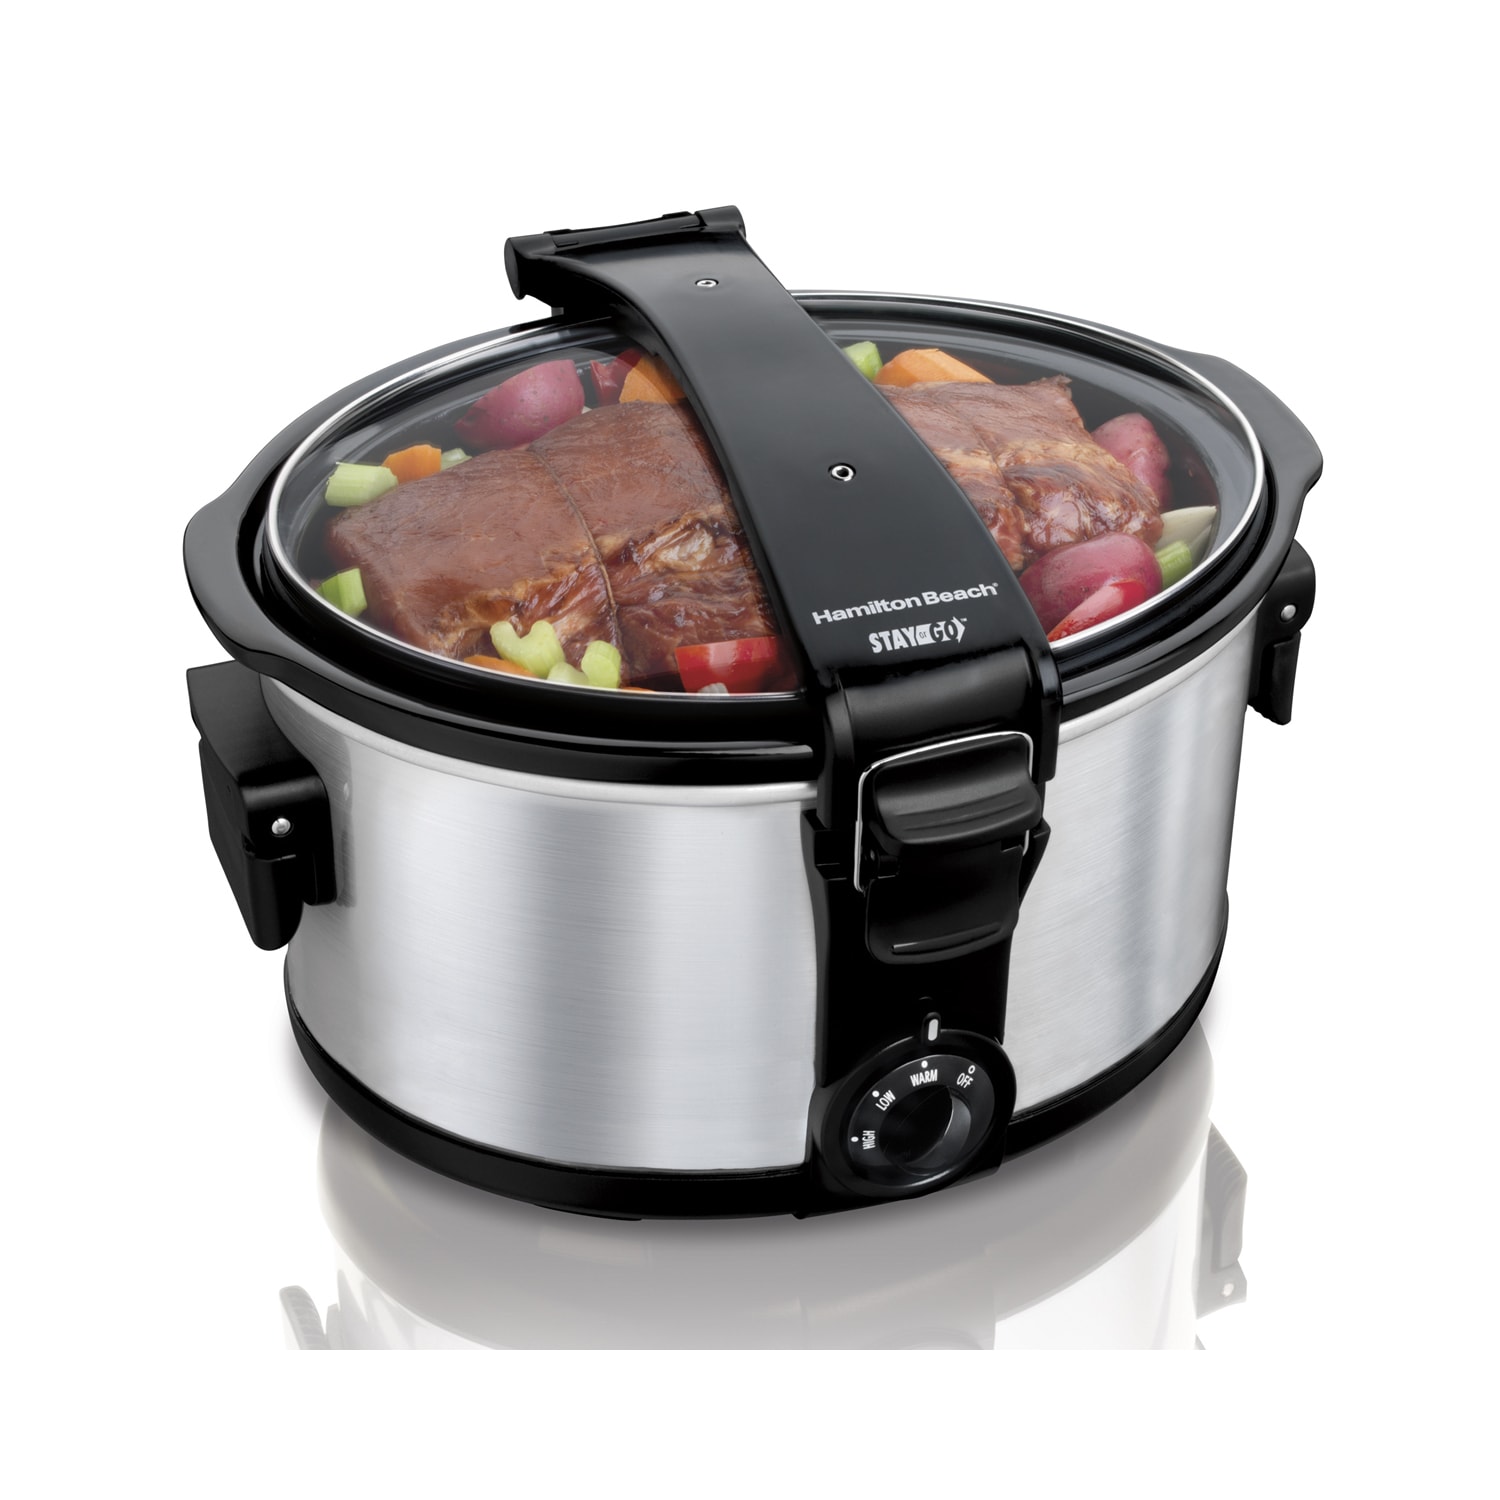  Hamilton Beach Programmable Slow Cooker with Flexible Easy  Programming, 5 Cooking Times, Dishwasher-Safe Crock, Lid, 7 Quart, Silver:  Crock Pots: Home & Kitchen